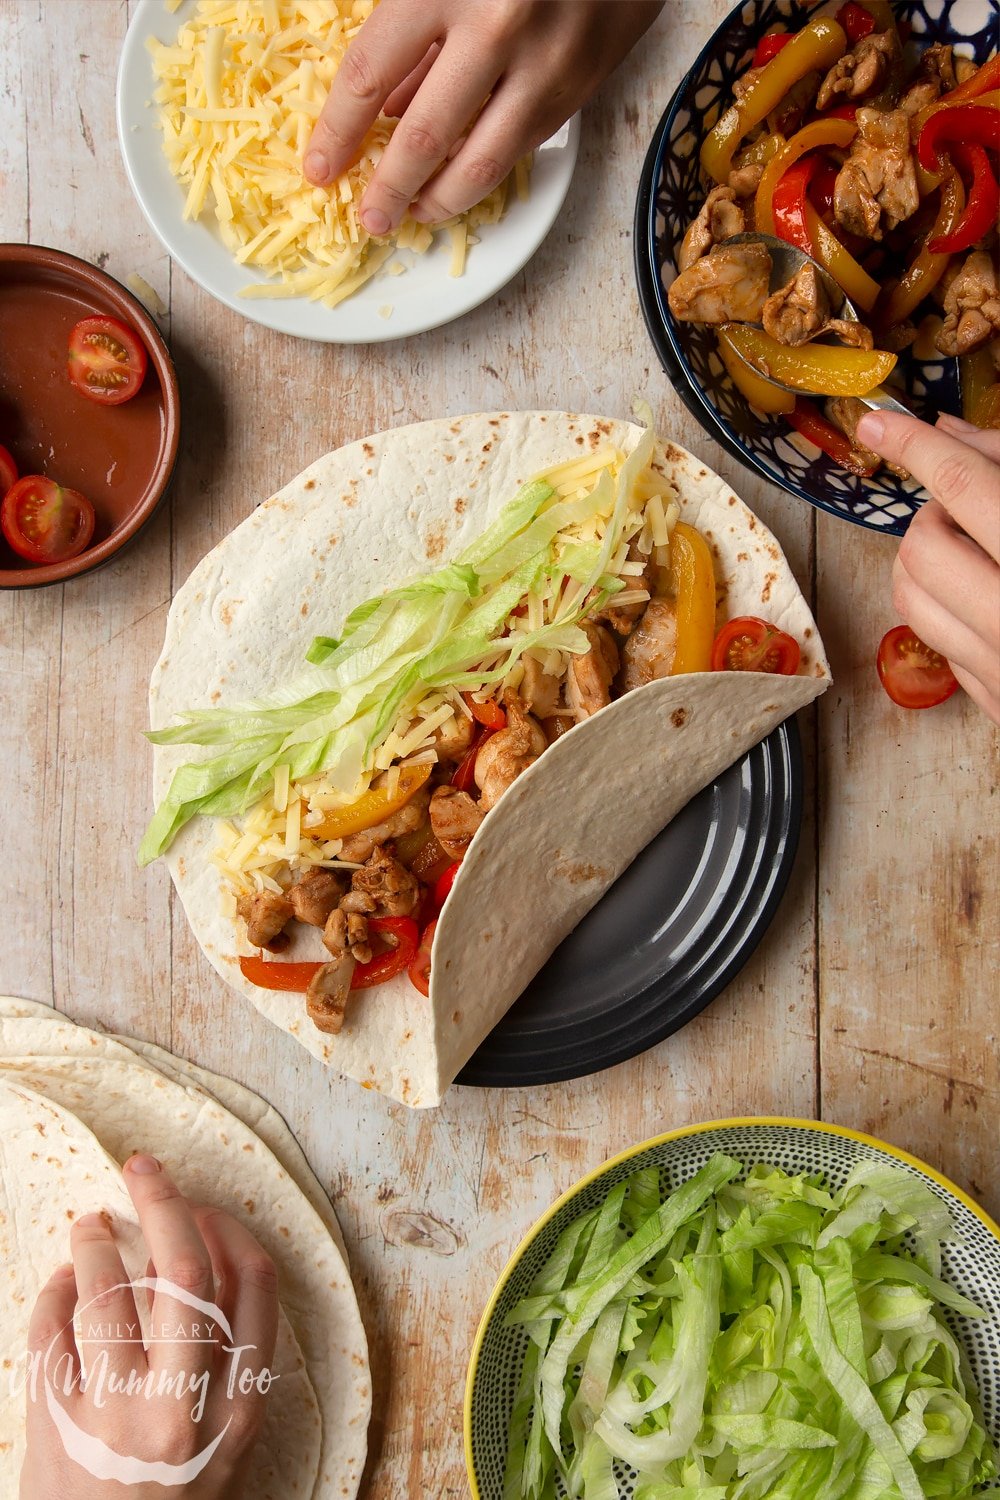 Adding a sprinkle of cheese to the Mild chicken fajitas for kids